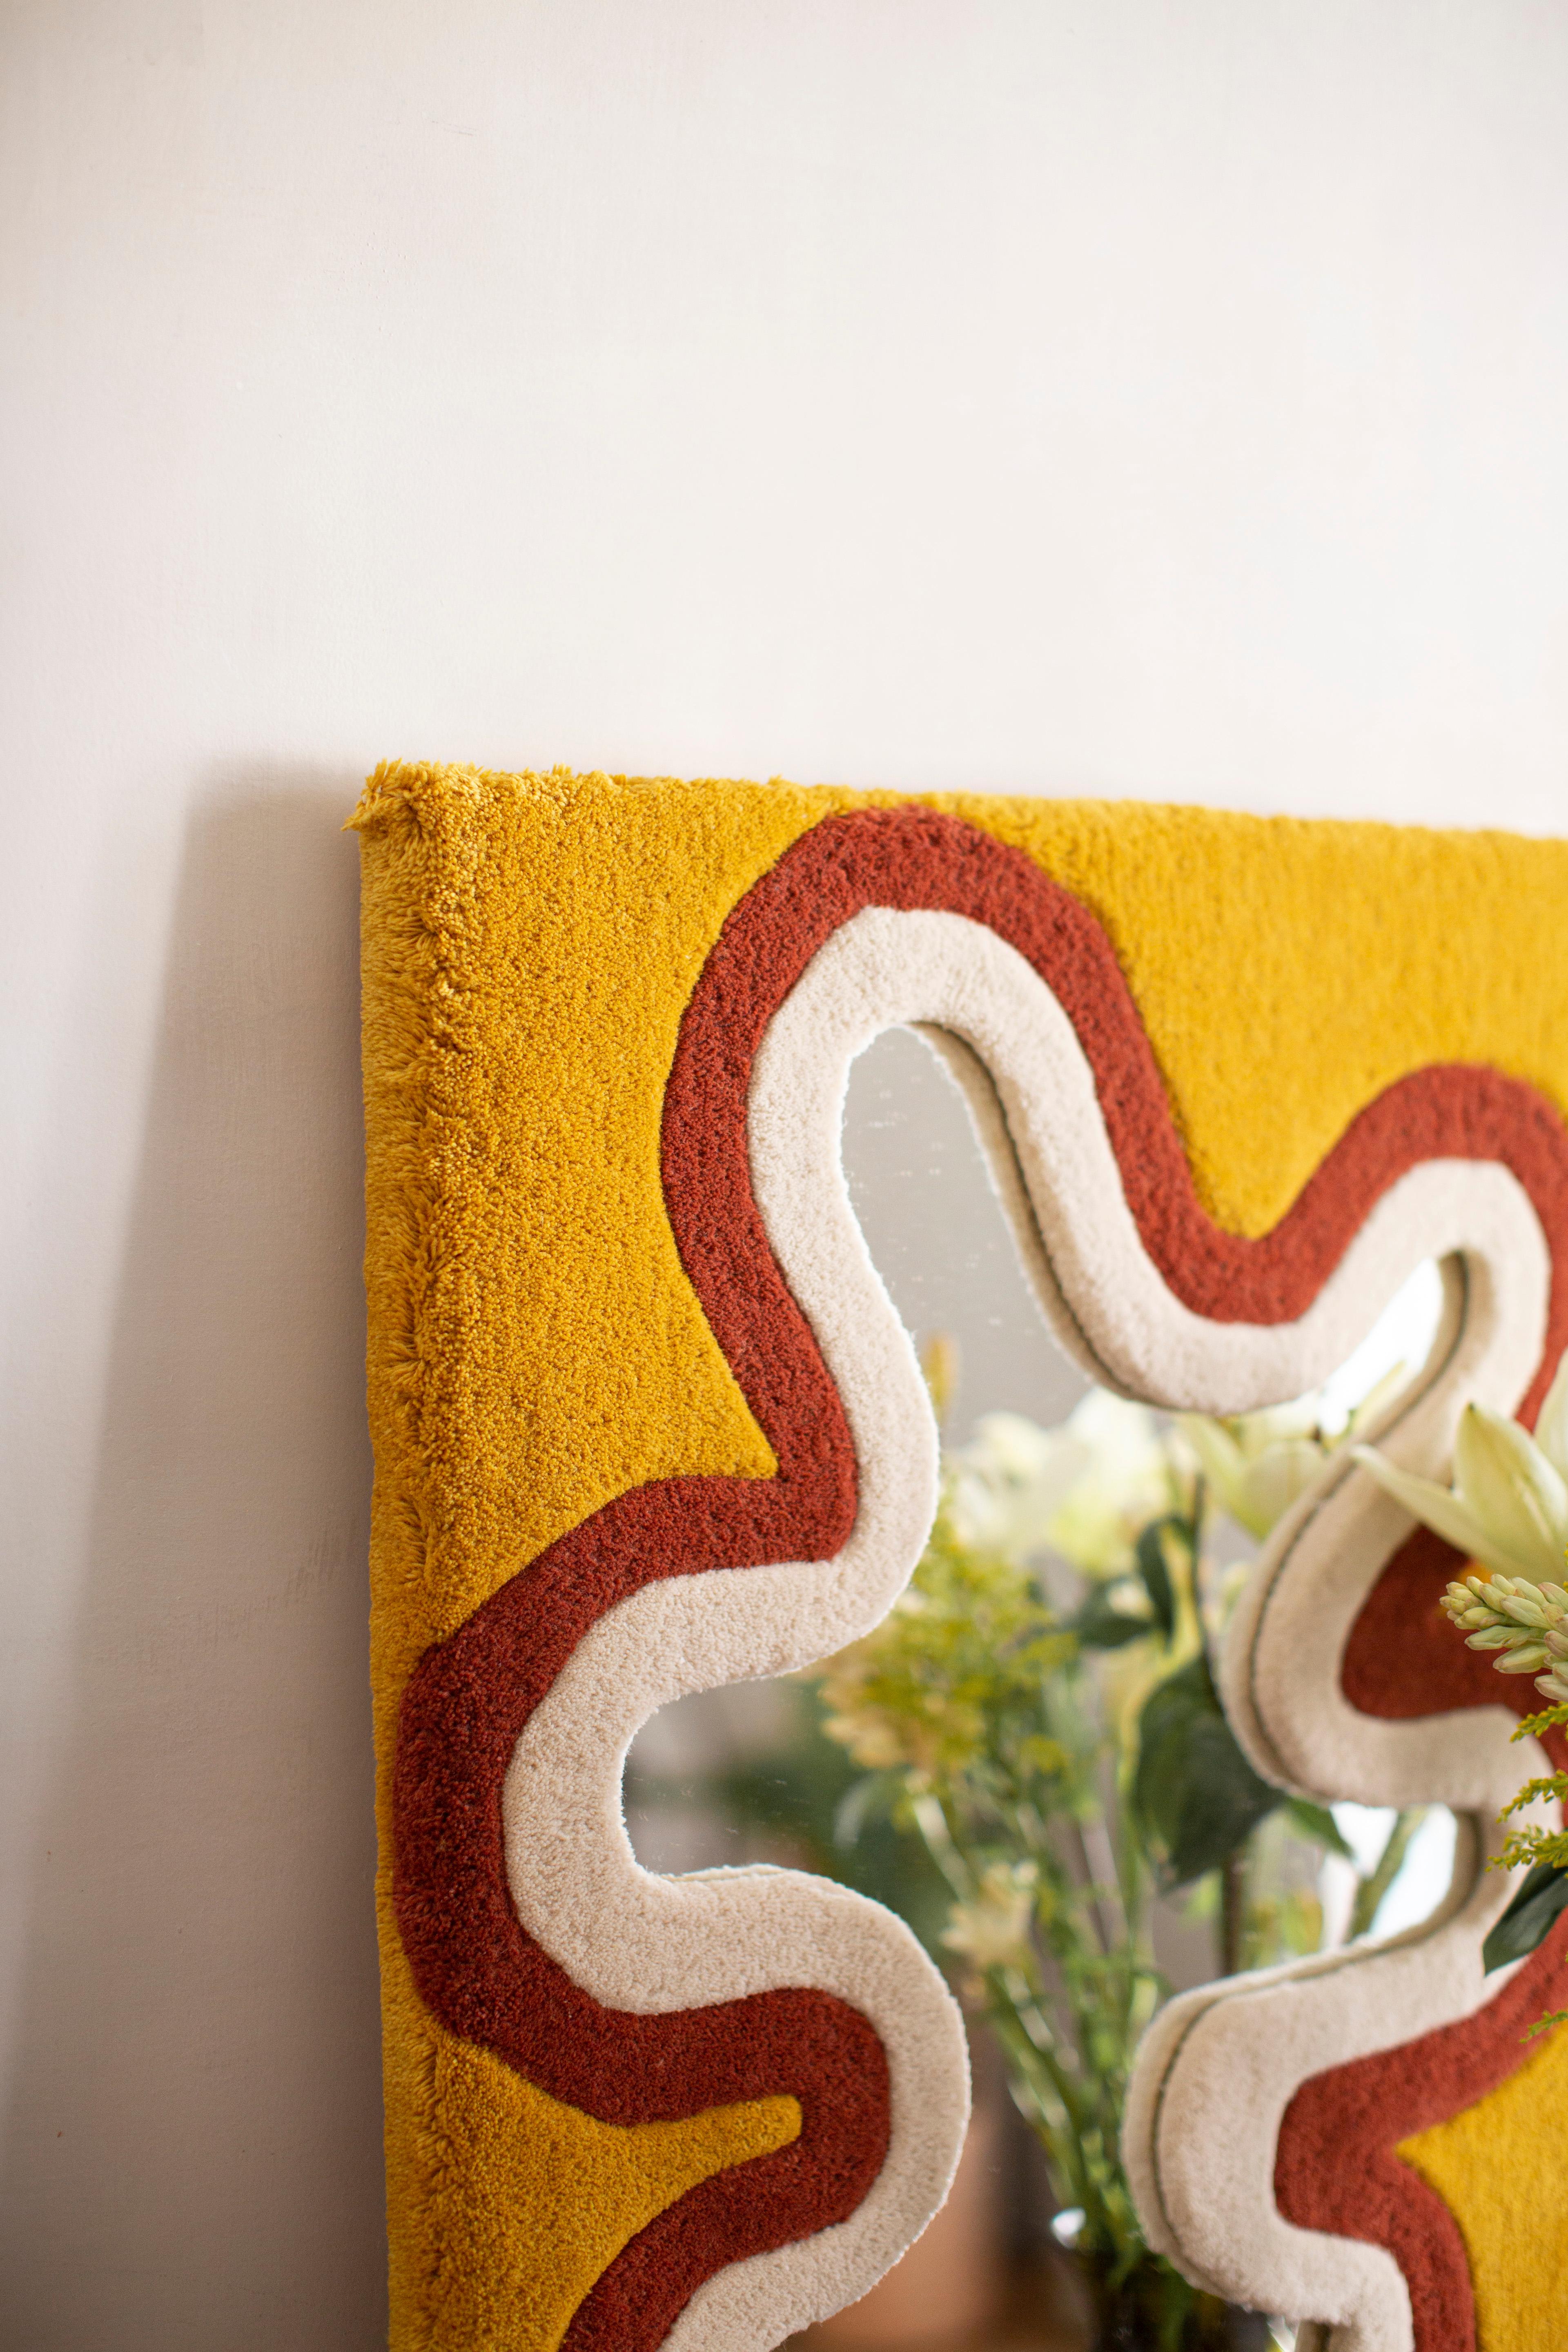 Mexican Contemporary “Barranca” Mirror 100% Wool Frame in Mustard Yellow by Brera Studio For Sale